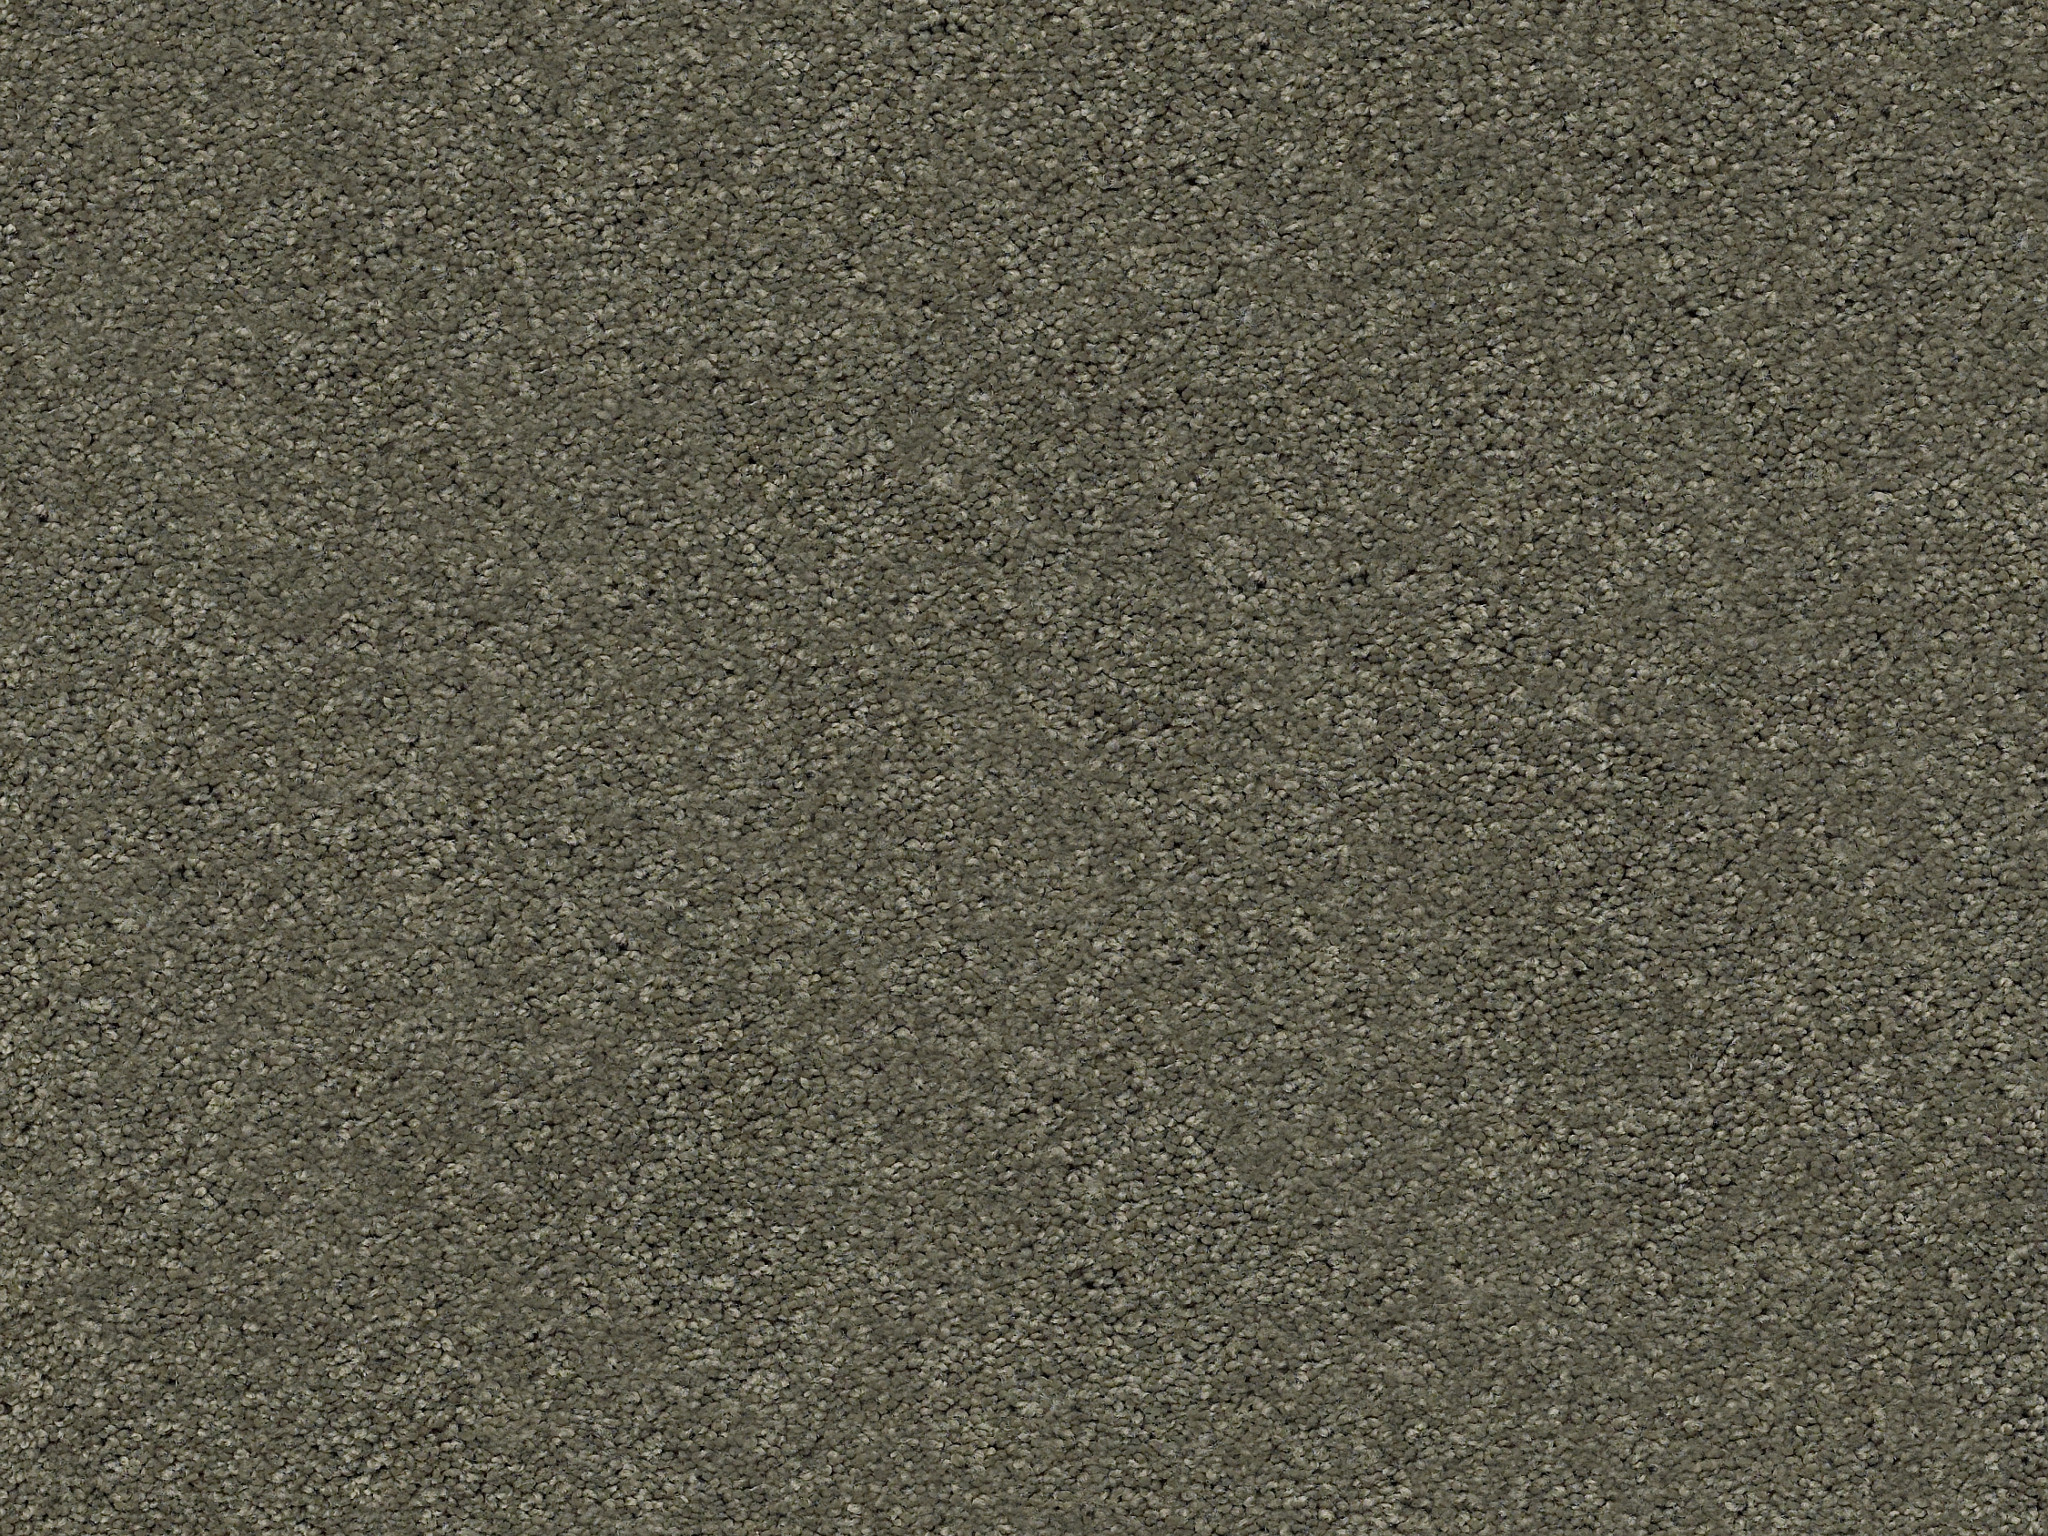 First Act Carpet - Wonder Zoomed Swatch Thumbnail